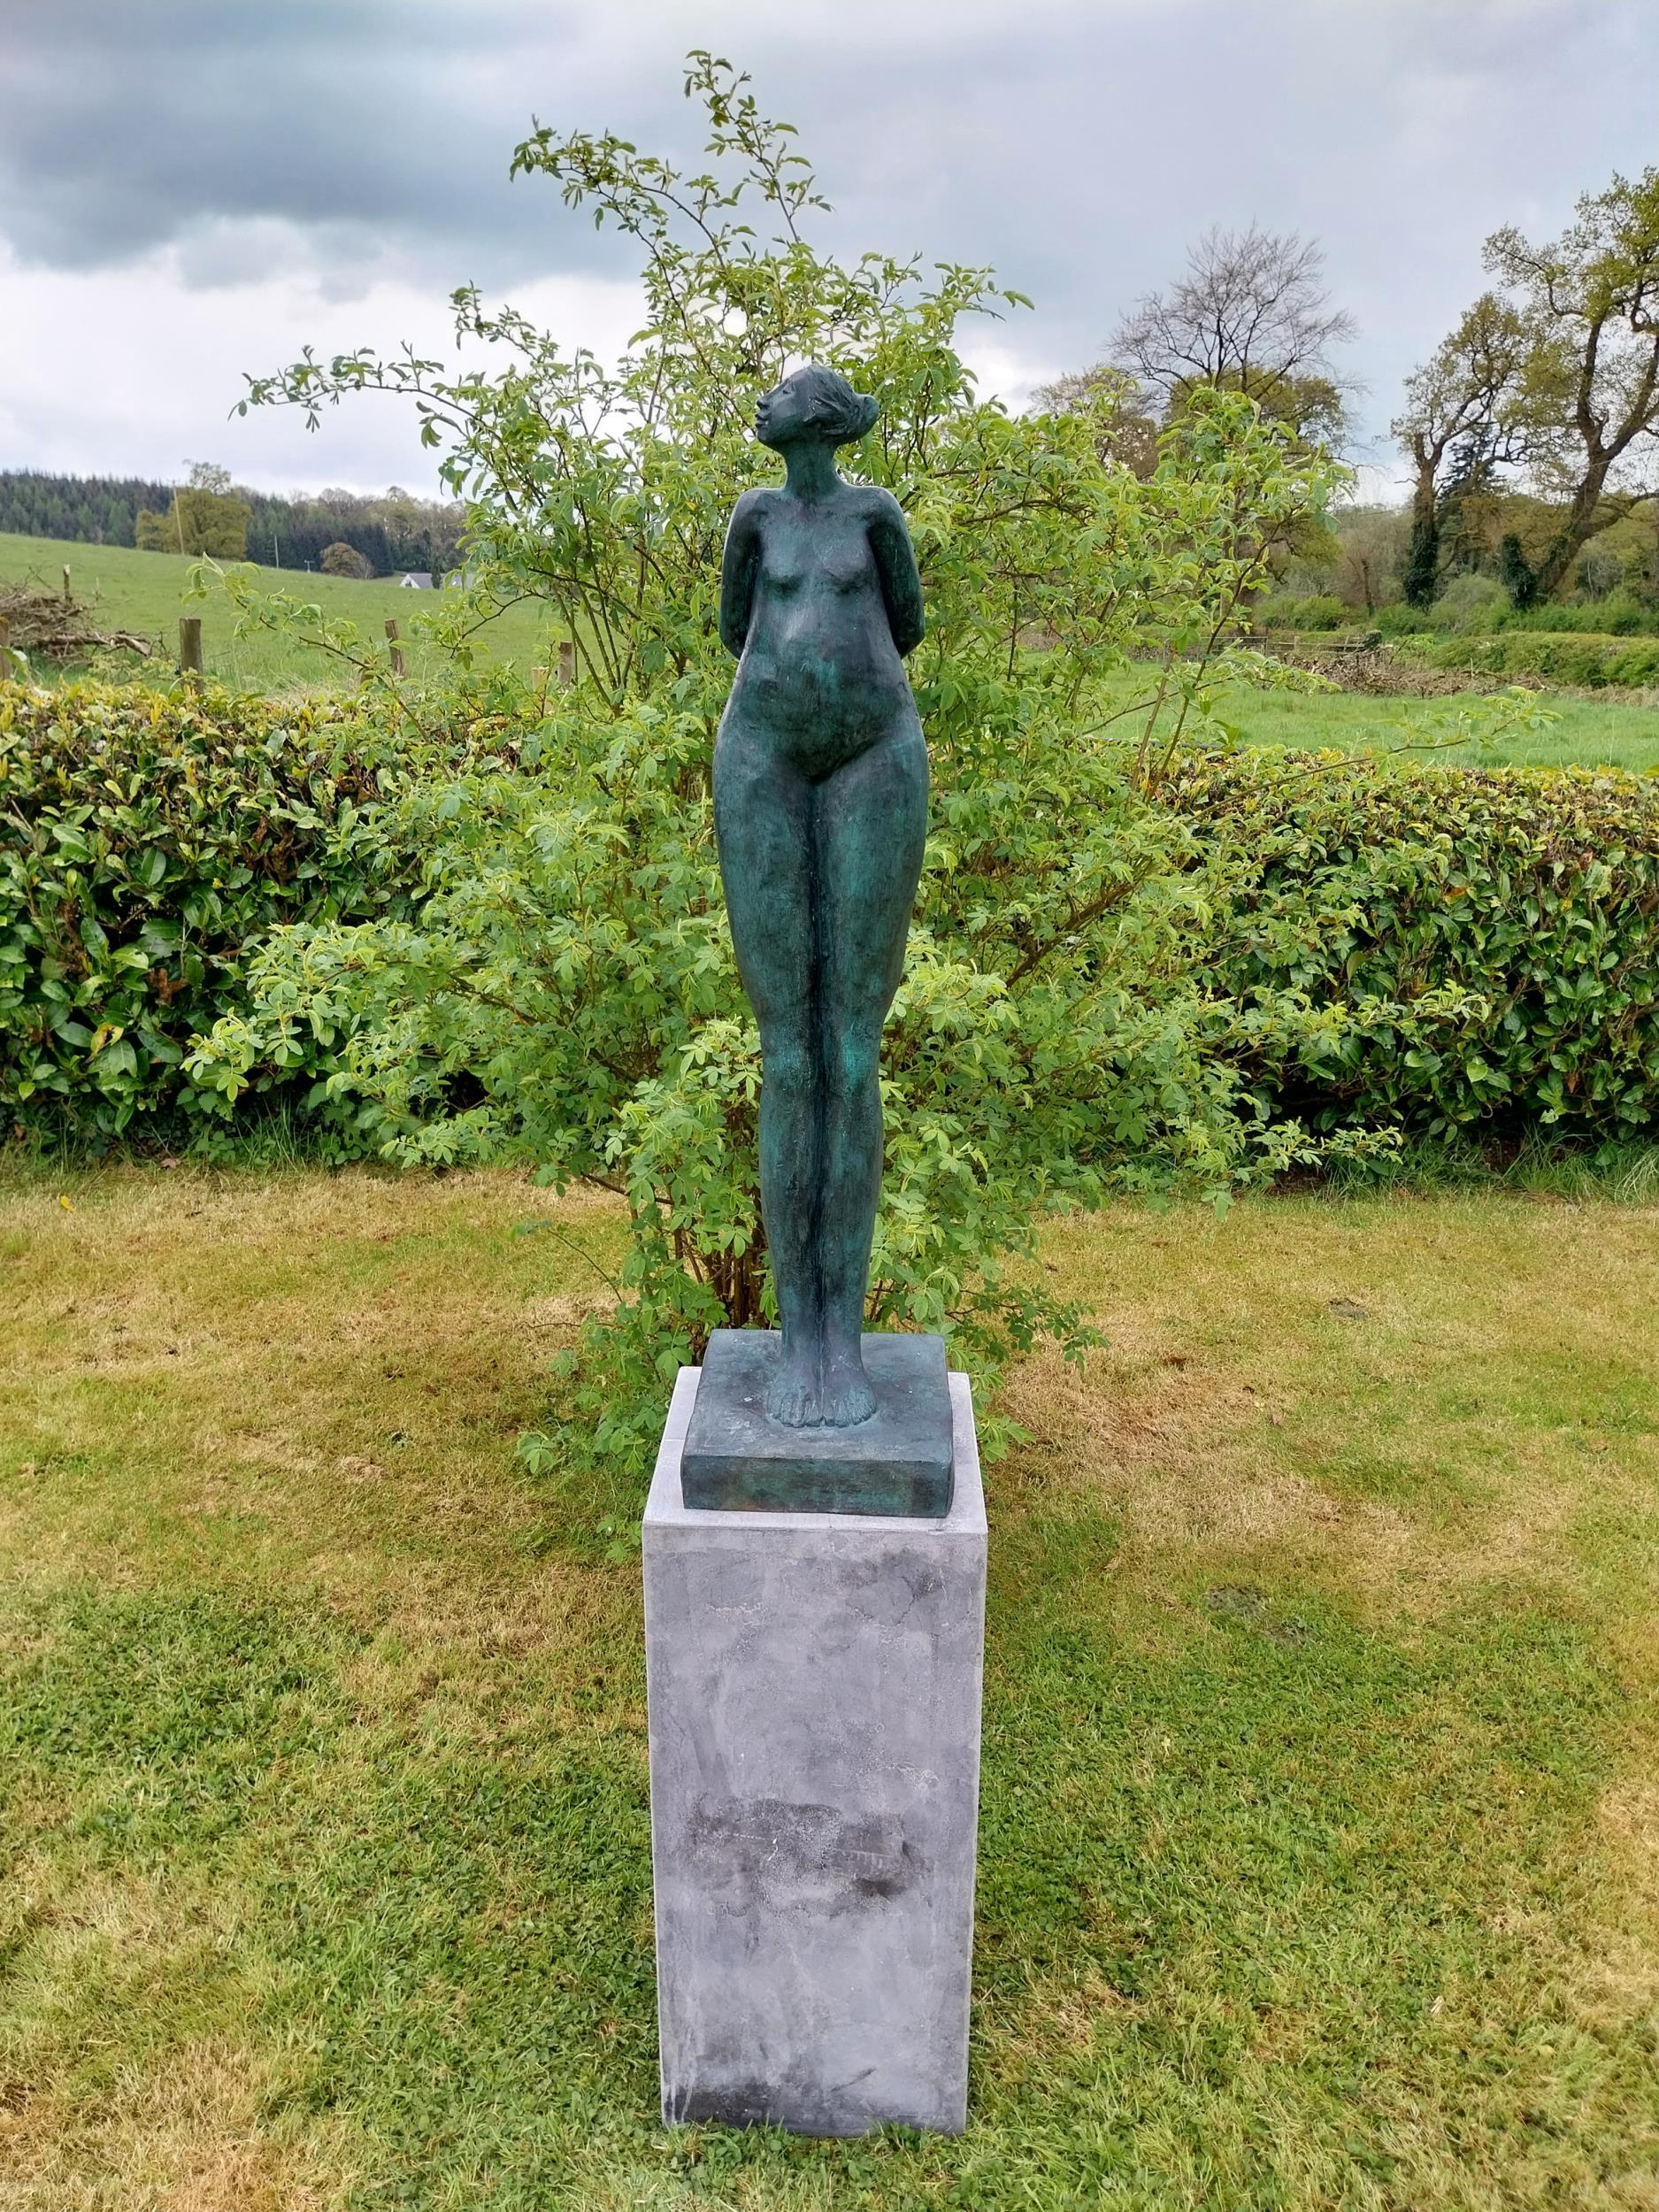 Exceptional quality contemporary bronze sculpture of a Lady with her head turned and arms folded